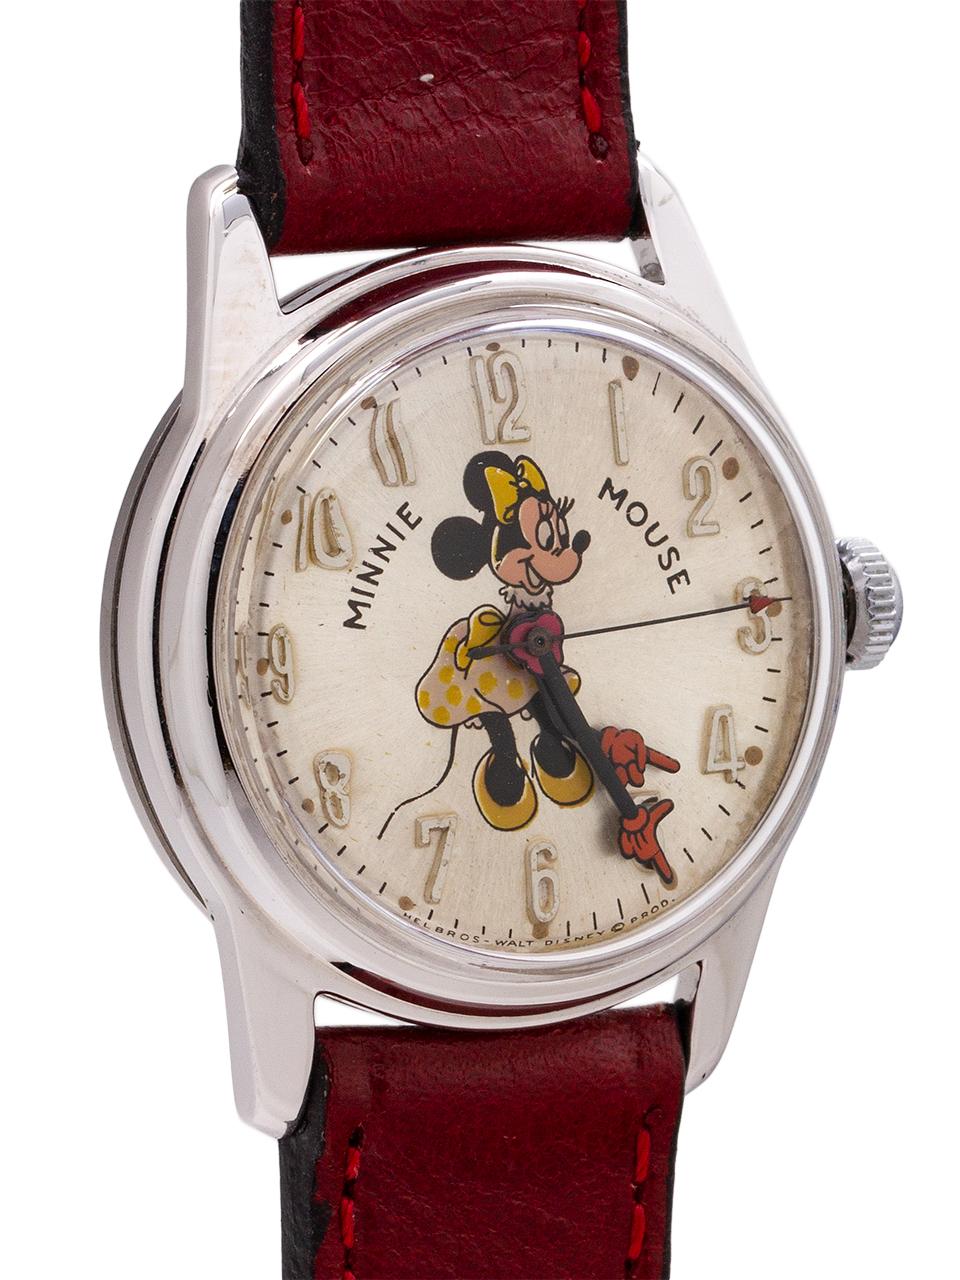 Vintage Helbros 17 jewel manual wind Minnie Mouse watch circa 1970’s. Featuring 31mm diameter chromium plated base metal case with steel snap down back. With acrylic crystal, and excellent condition original dial with polychrome depiction of popular